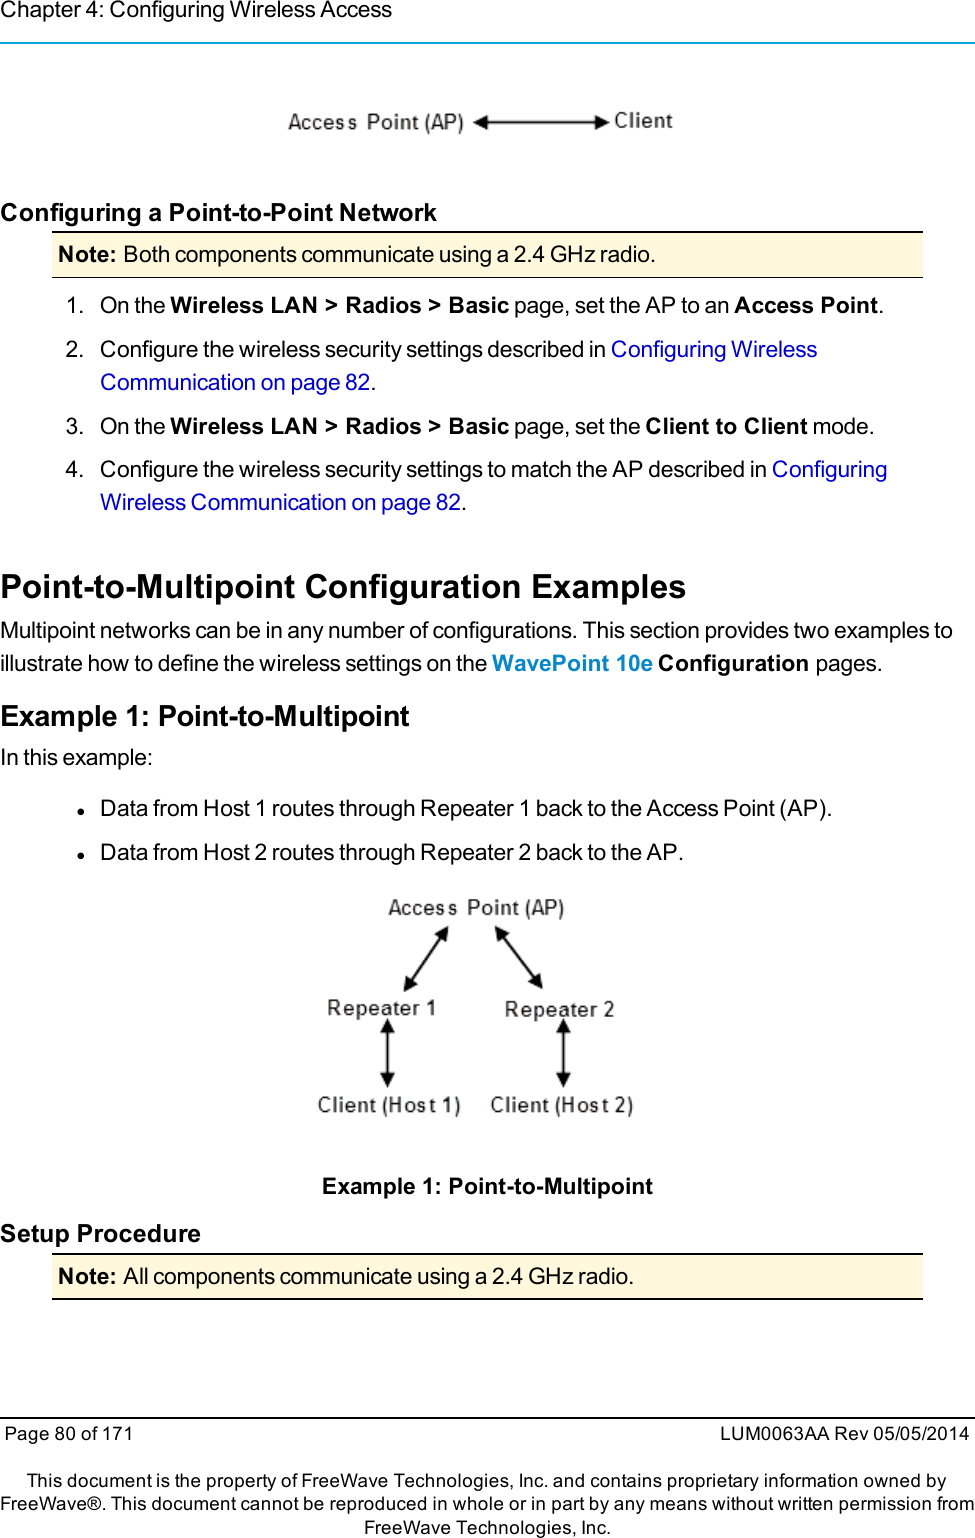 Chapter 4: Configuring Wireless AccessConfiguring a Point-to-Point NetworkNote: Both components communicate using a 2.4 GHz radio.1. On the Wireless LAN &gt; Radios &gt; Basic page, set the AP to an Access Point.2. Configure the wireless security settings described in Configuring WirelessCommunication on page 82.3. On the Wireless LAN &gt; Radios &gt; Basic page, set the Client to Client mode.4. Configure the wireless security settings to match the AP described in ConfiguringWireless Communication on page 82.Point-to-Multipoint Configuration ExamplesMultipoint networks can be in any number of configurations. This section provides two examples toillustrate how to define the wireless settings on the WavePoint 10e Configuration pages.Example 1: Point-to-MultipointIn this example:lData from Host 1 routes through Repeater 1 back to the Access Point (AP).lData from Host 2 routes through Repeater 2 back to the AP.Example 1: Point-to-MultipointSetup ProcedureNote: All components communicate using a 2.4 GHz radio.Page 80 of 171 LUM0063AA Rev 05/05/2014This document is the property of FreeWave Technologies, Inc. and contains proprietary information owned byFreeWave®. This document cannot be reproduced in whole or in part by any means without written permission fromFreeWave Technologies, Inc.